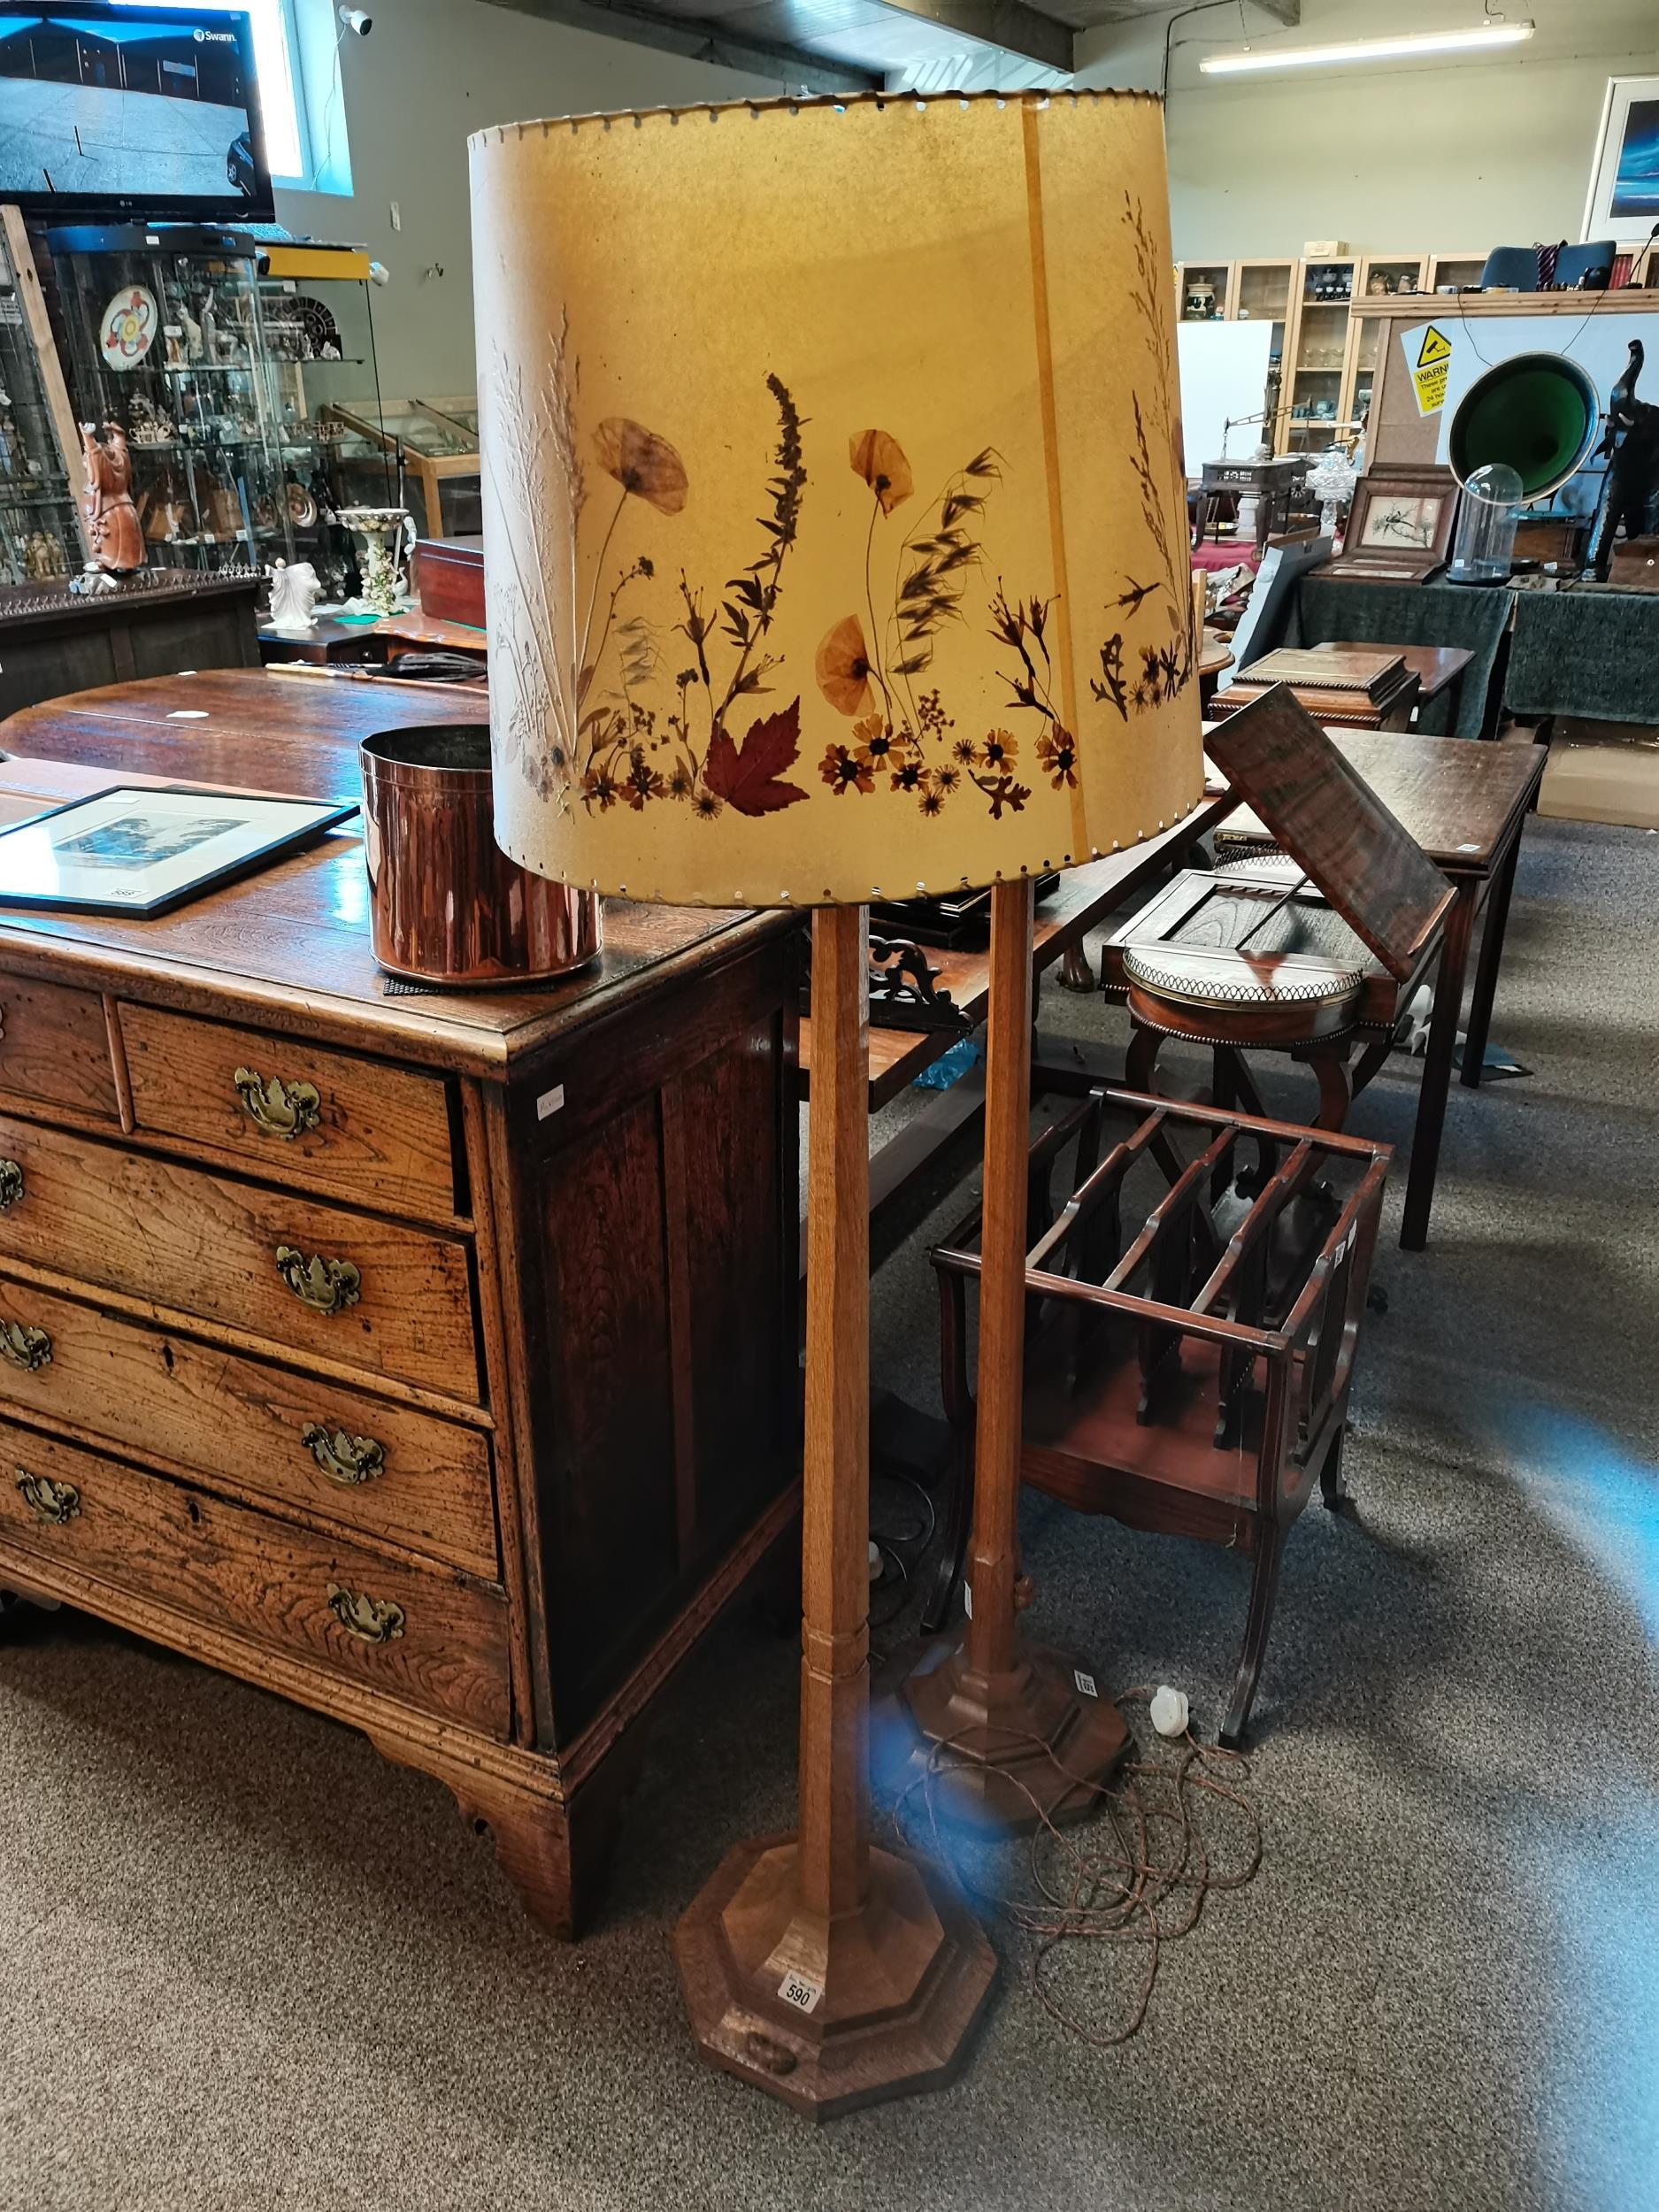 Mouseman standard lamp Condition Grade:  A Excellent: In excellent condition with no